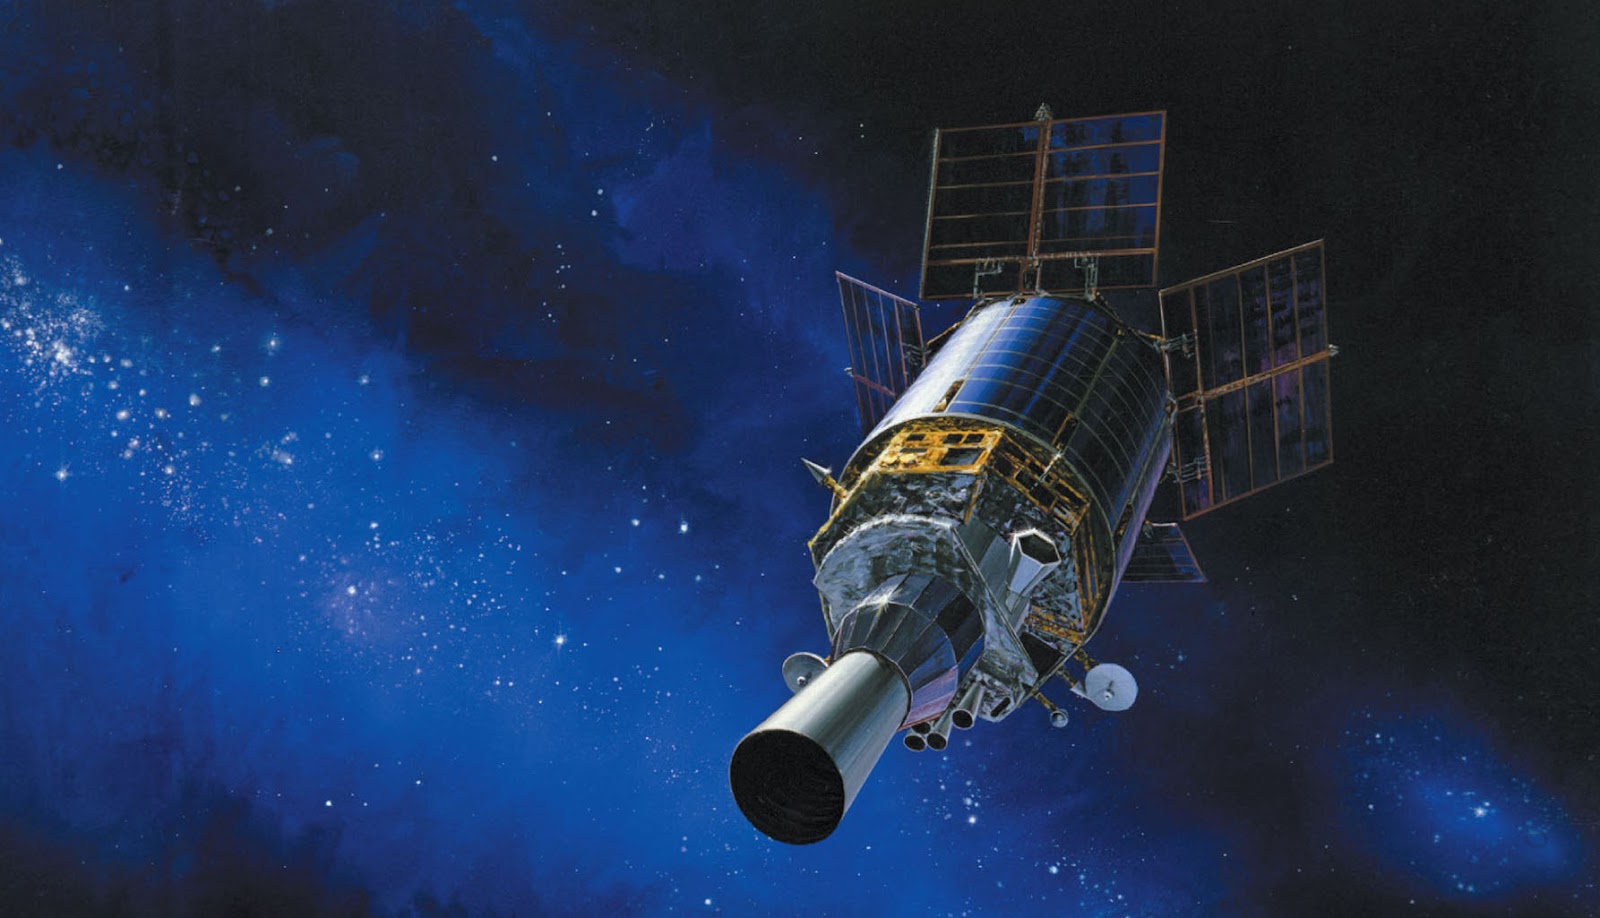 An artist's rendering of a satellite in space.